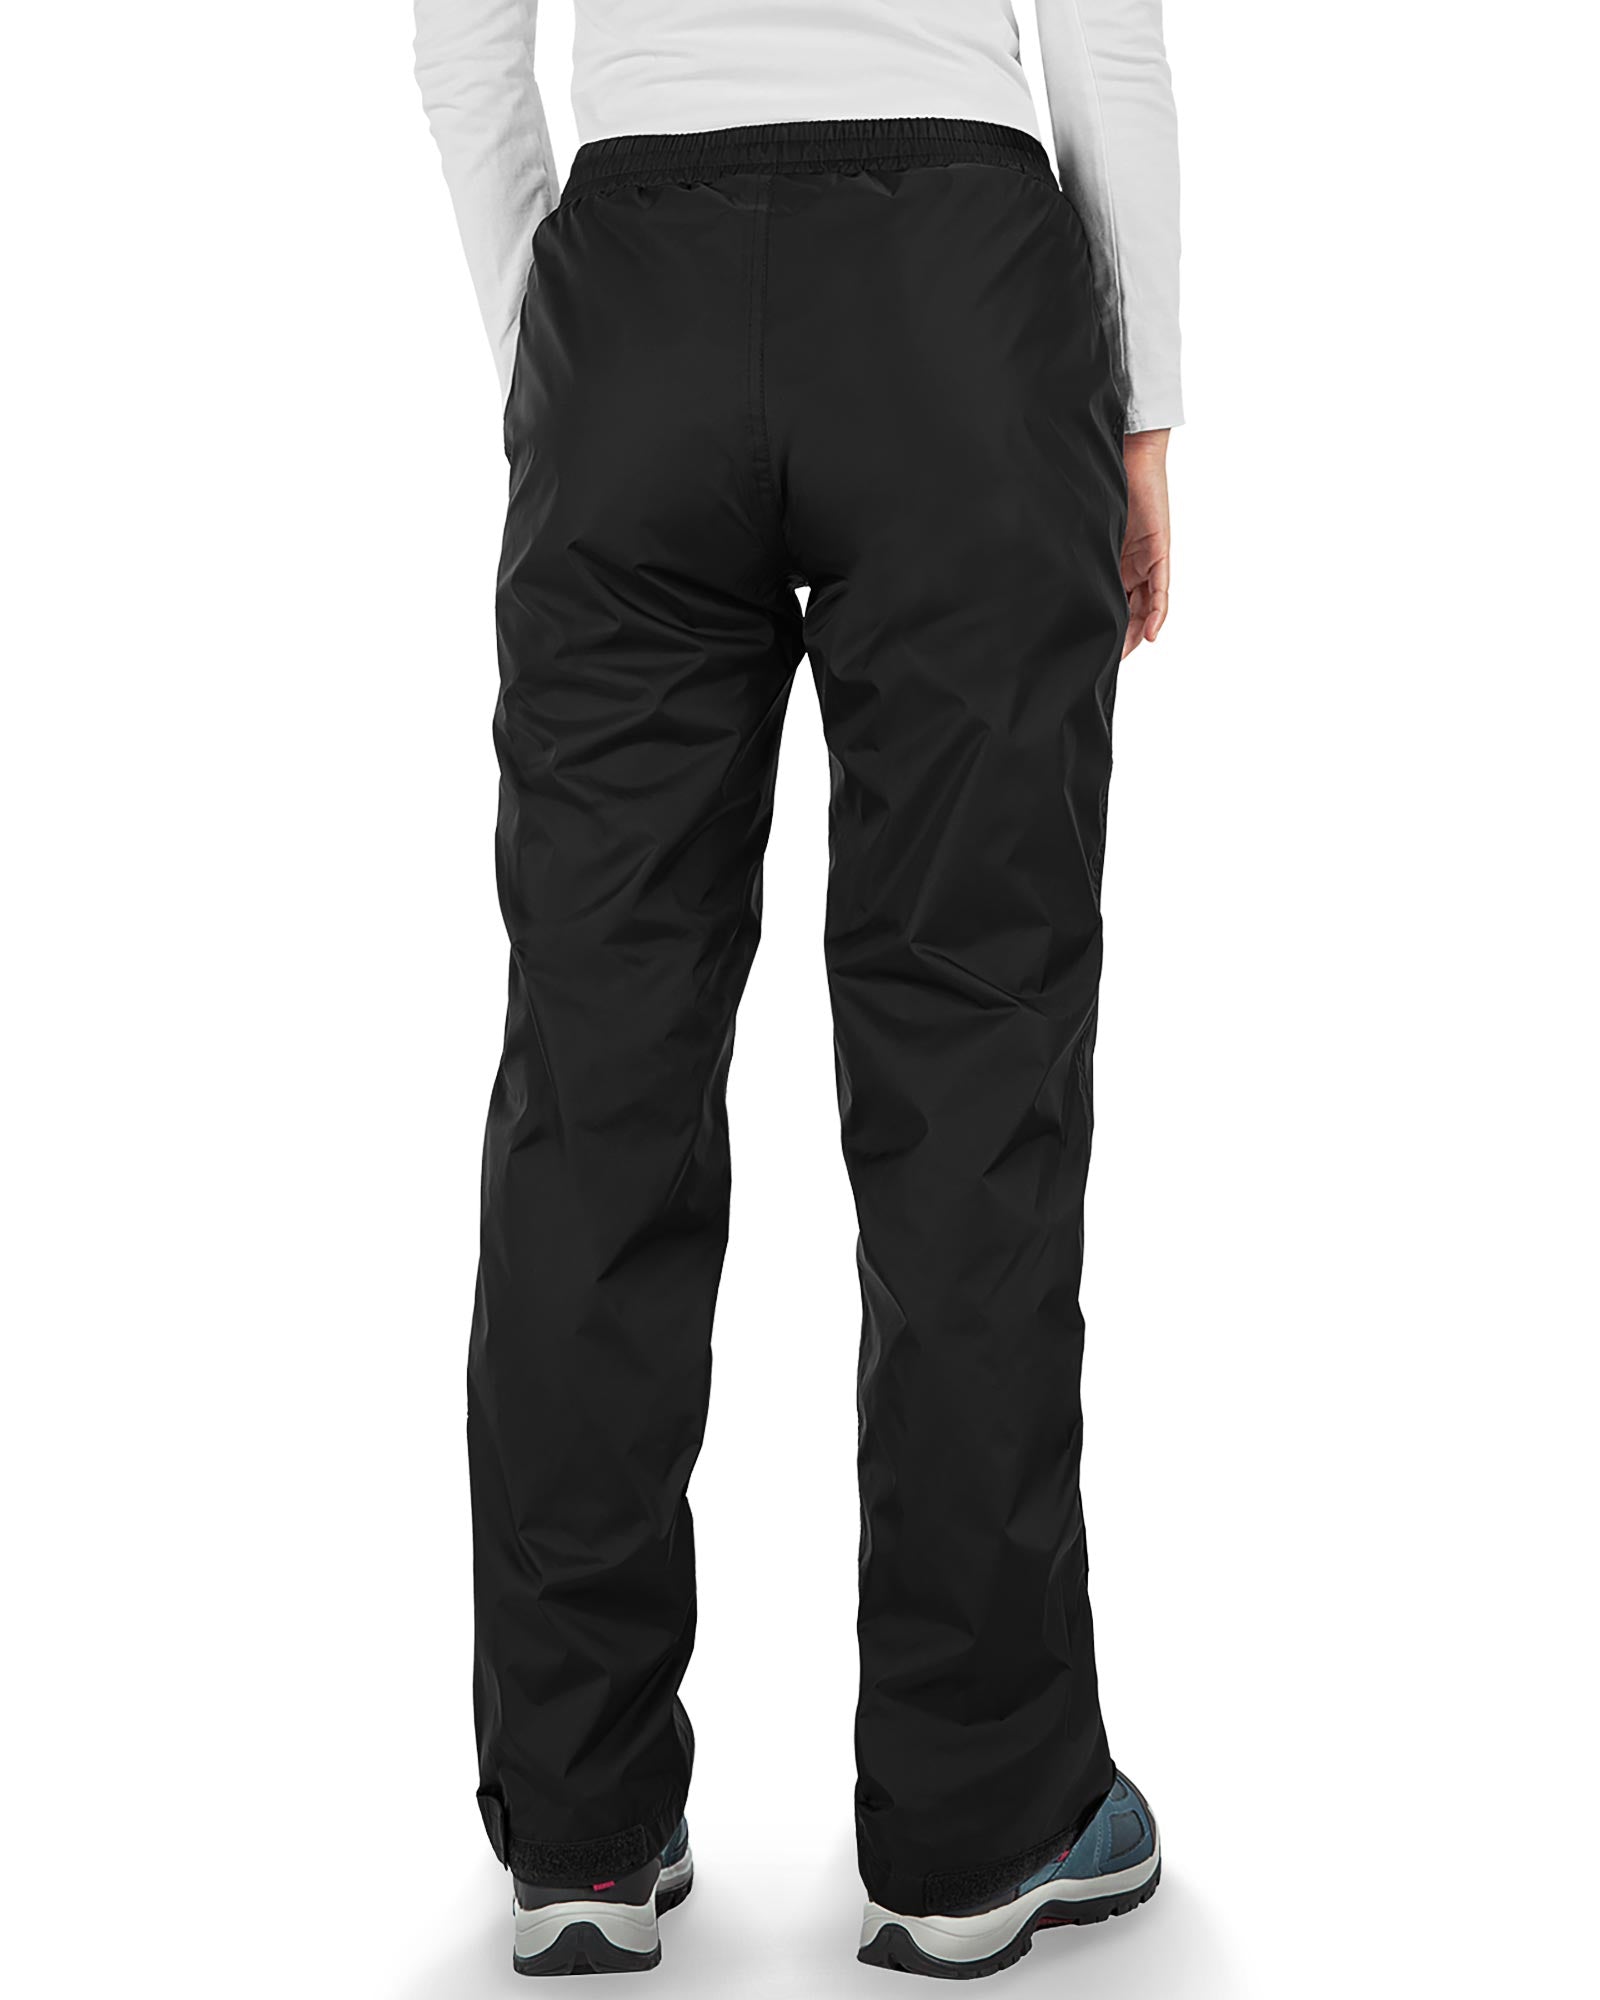 Women's Rain Pants with Reflective and Adjustable Design: 0.55 lbs 500 –  33,000ft